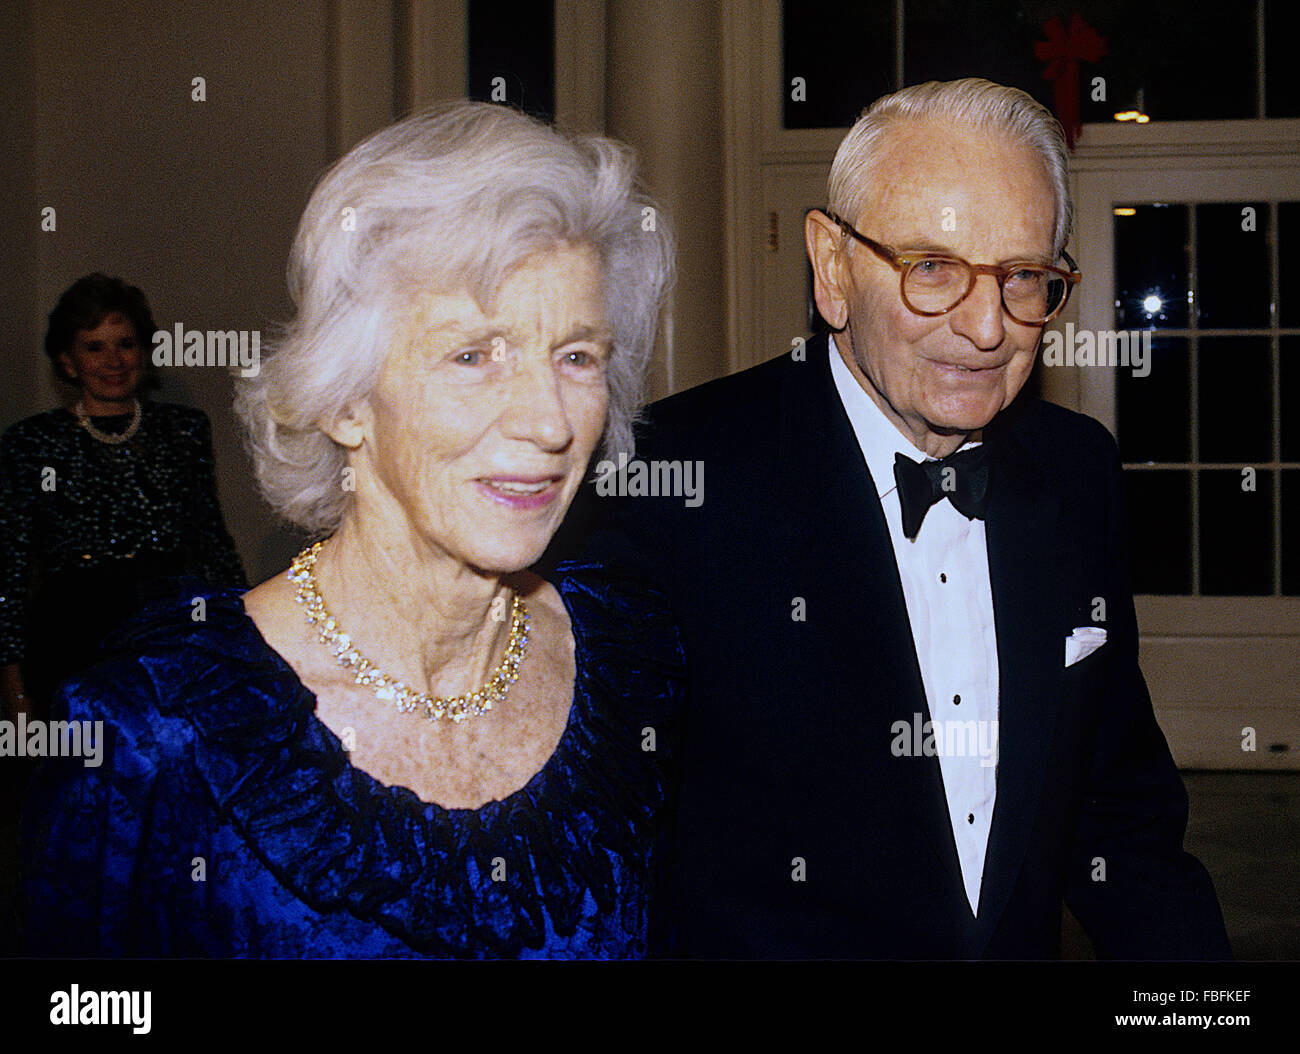 Washington, DC. 12-6-1992  Laurance Rockefeller and wife Mary arrive at the White House to attend the State Dinner for the Kennedy Centers Honors.  Laurance Spelman Rockefeller an American philanthropist, businessman, financier, and major conservationist. He was a prominent third-generation member of the Rockefeller family, being the fourth child of John Davison Rockefeller, Jr. and Abigail Greene "Abby" Aldrich. His siblings were Abby, John III, Nelson, Winthrop, and David.  Credit: Mark Reinstein Stock Photo